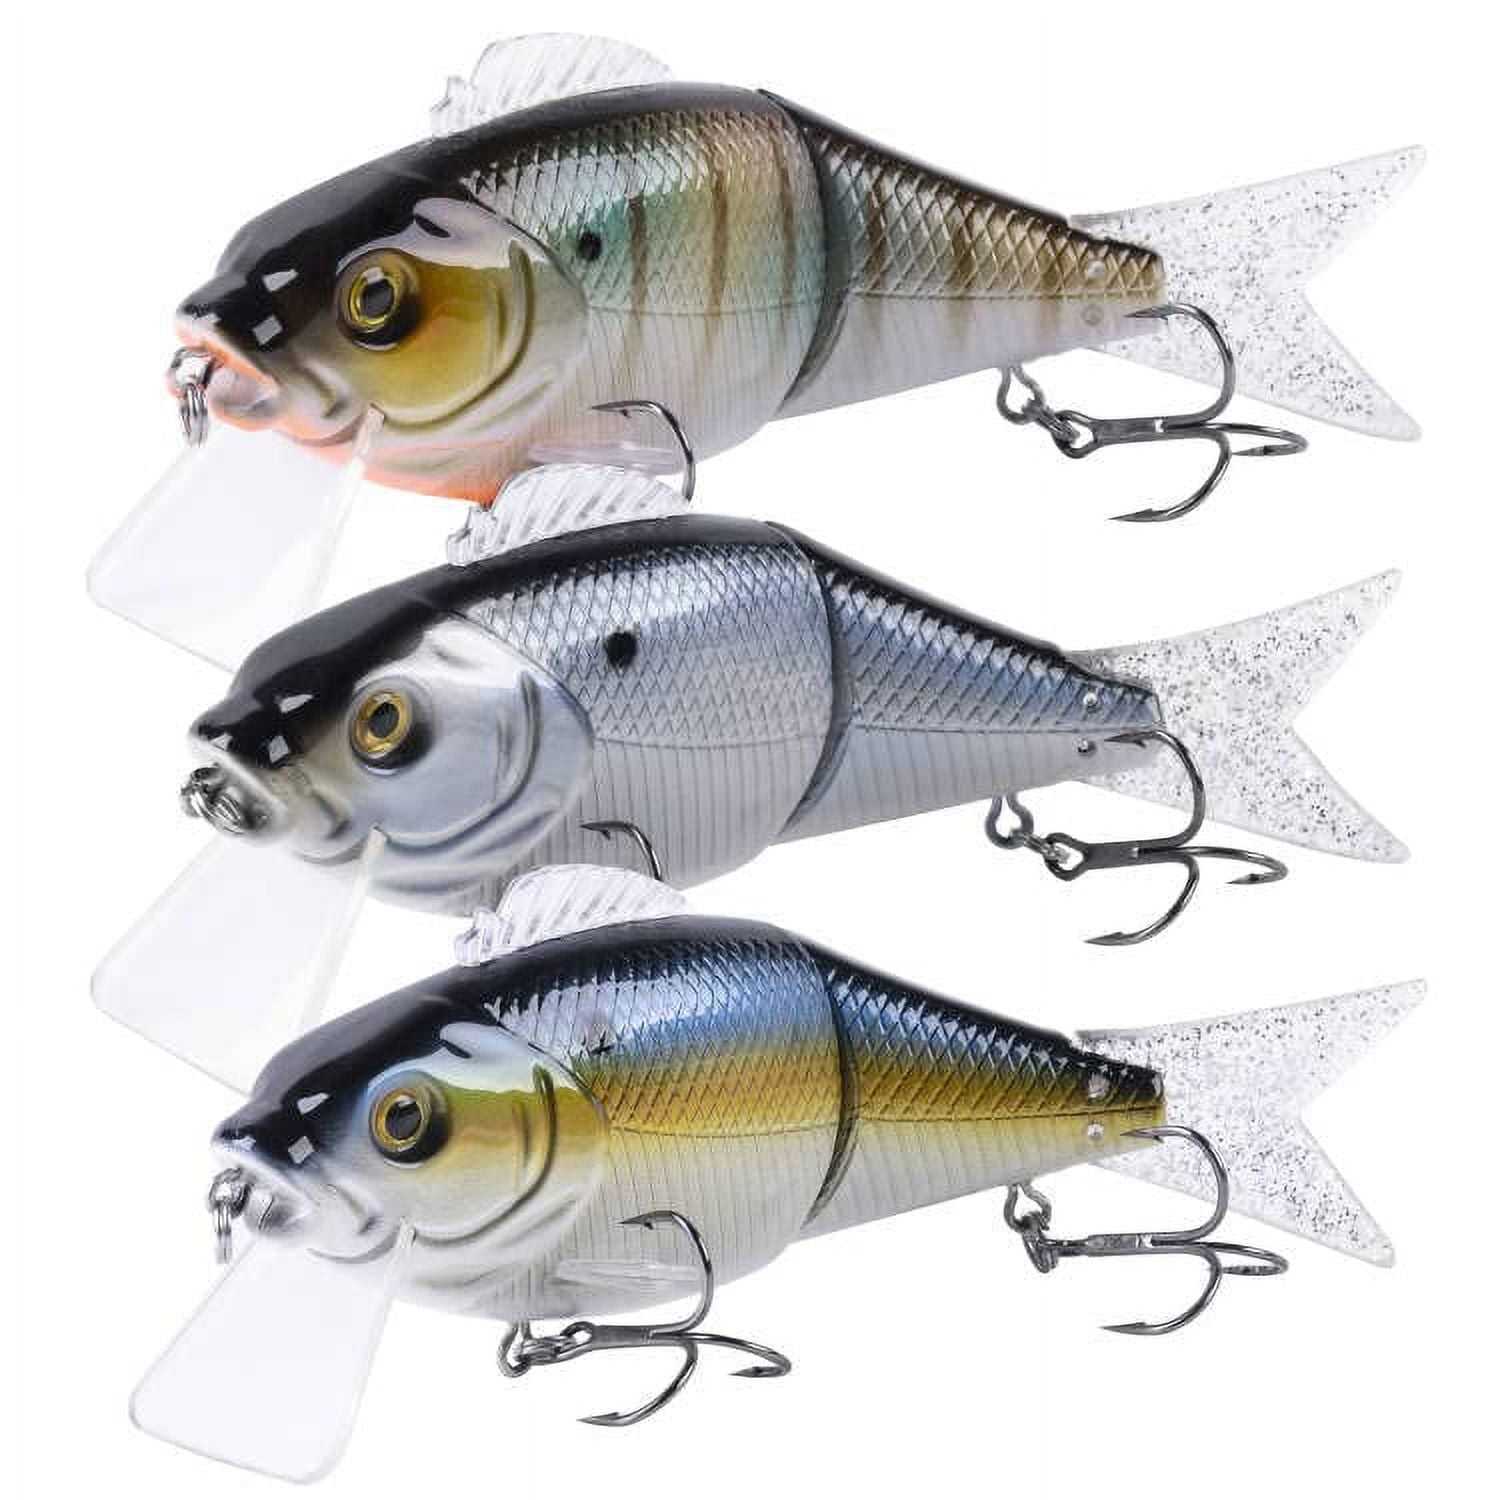 Goture Swimbaits for Bass Fishing, Realistic Bass Fishing Lures - 3pcs  Multi Jointed Bass Lure Bait Kit for Freshwater & Saltwater, Fast Casting  0.99oz/1.76oz/1.87oz 